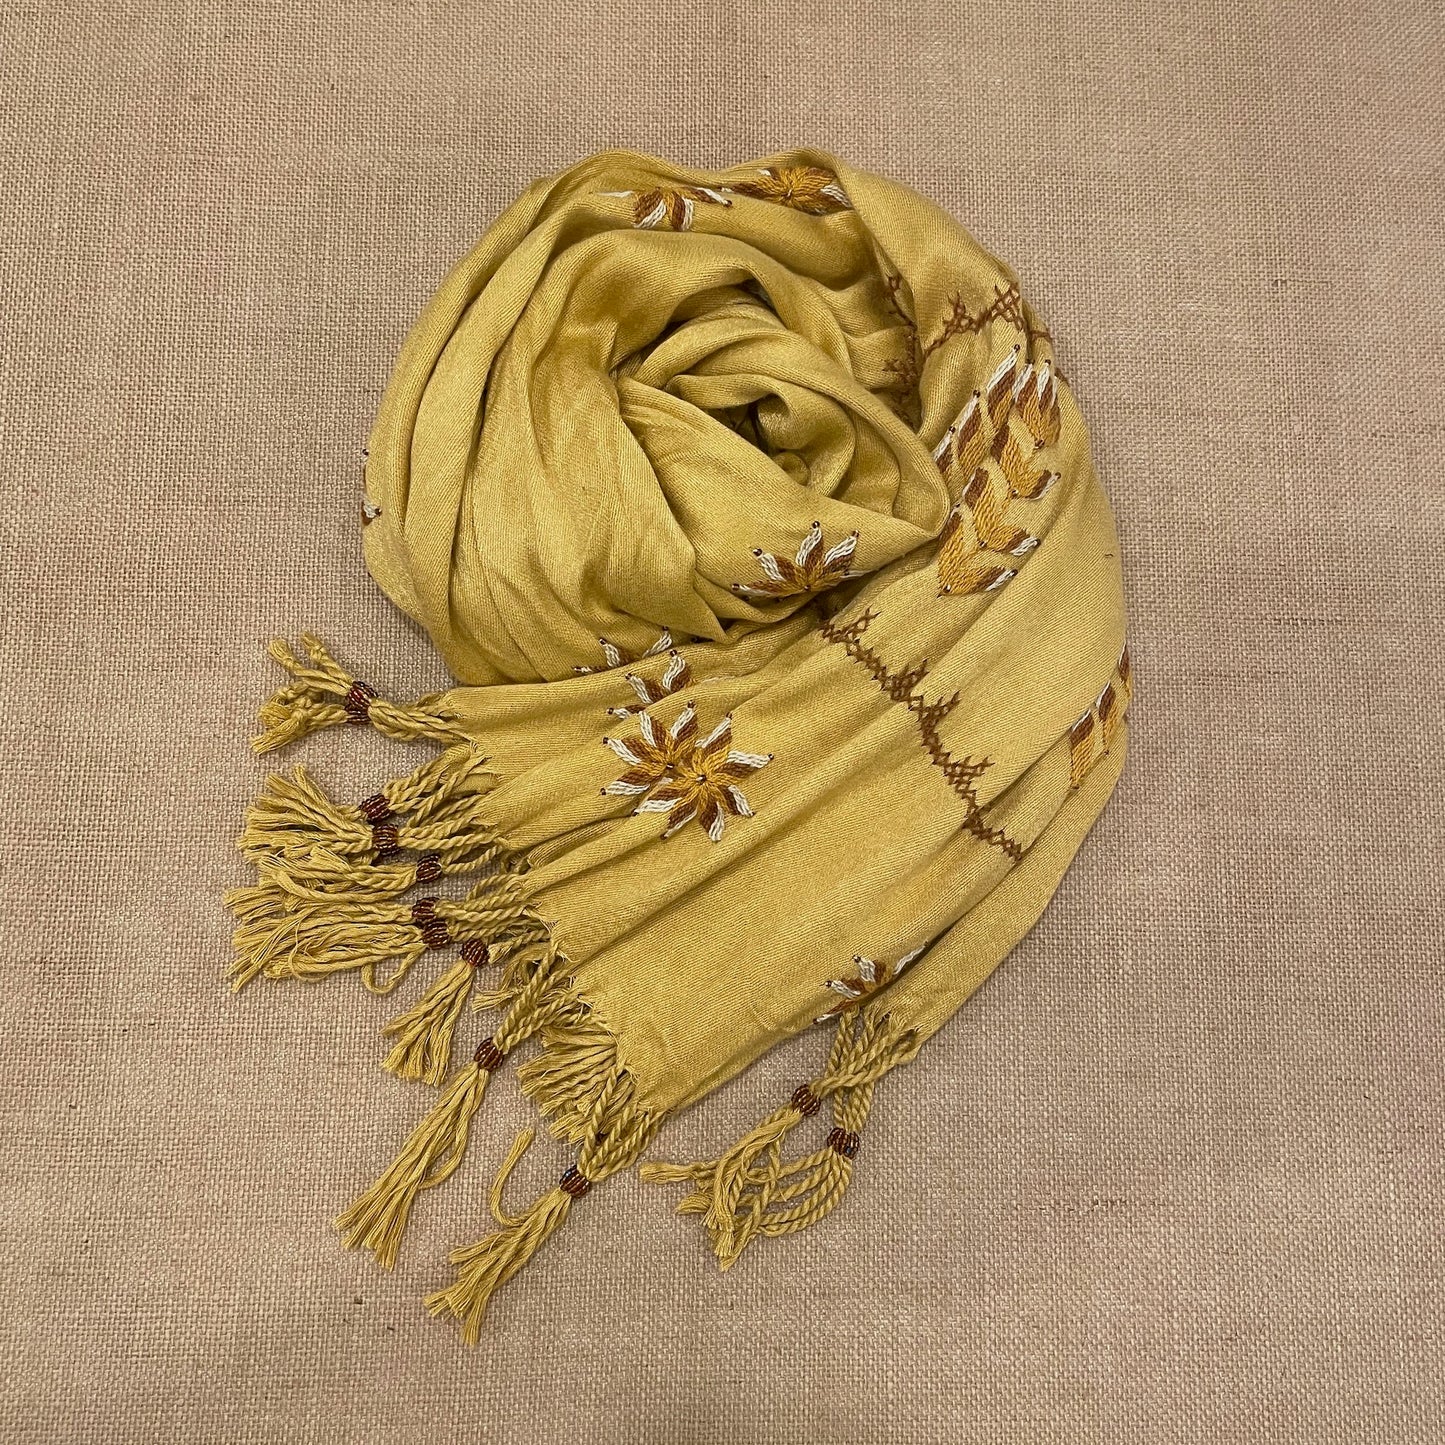 Bedouin Hand-embroidered Golden Beige Pashmina Scarf